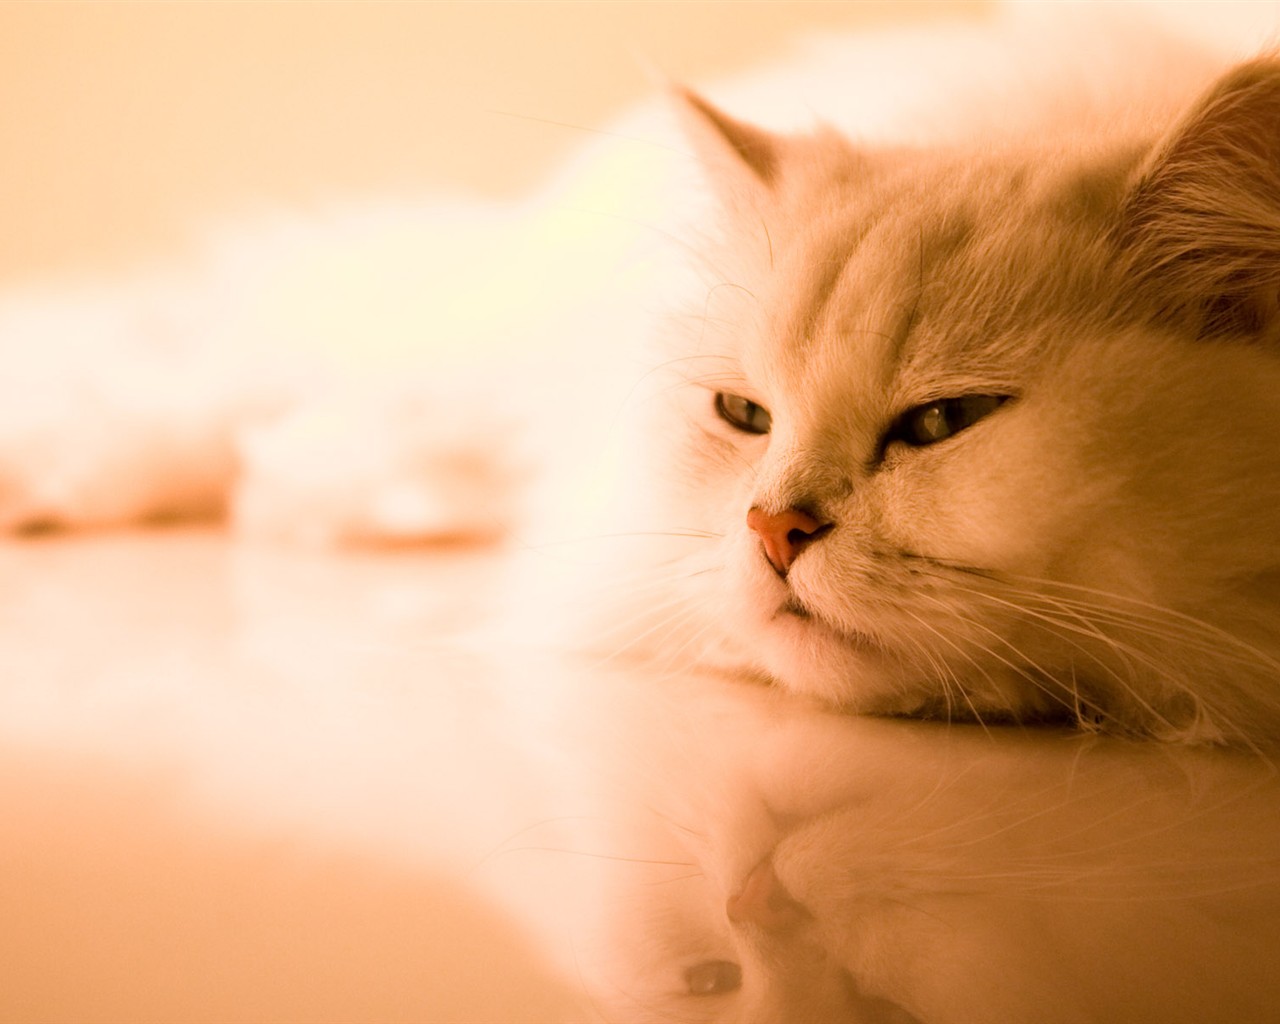 Cat photo HD Wallpapers #35 - 1280x1024